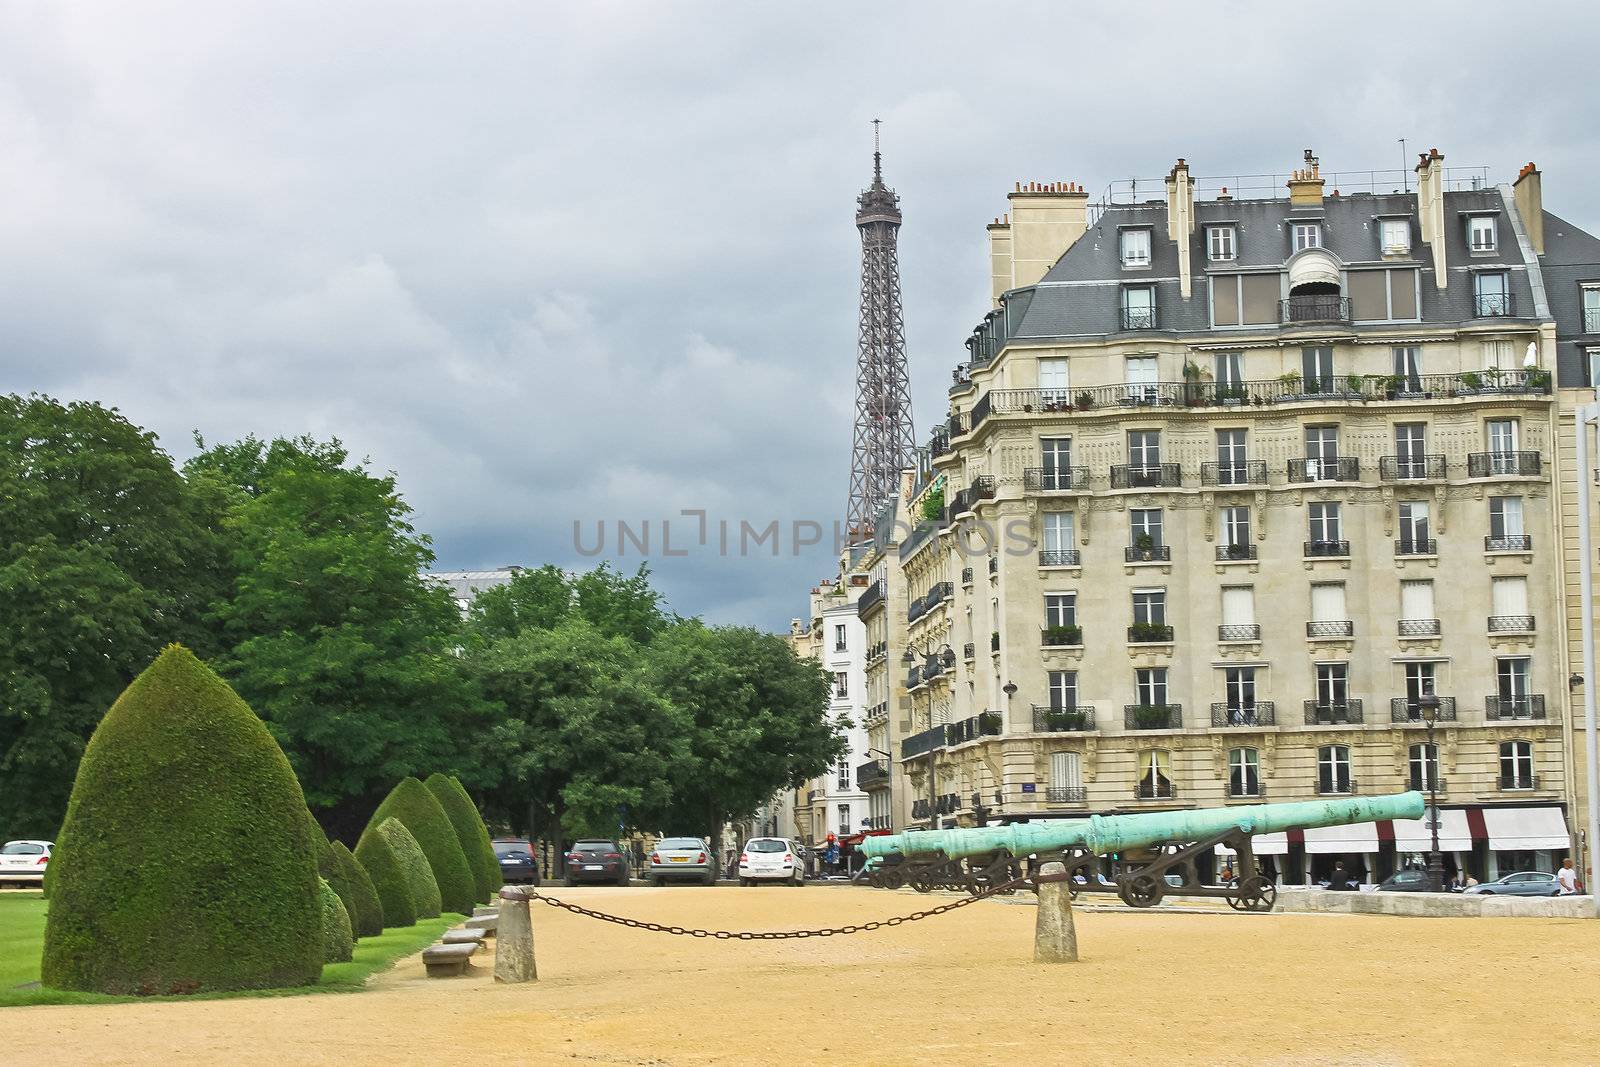 A view of the Eiffel Tower from Les Invalides in Paris by NickNick